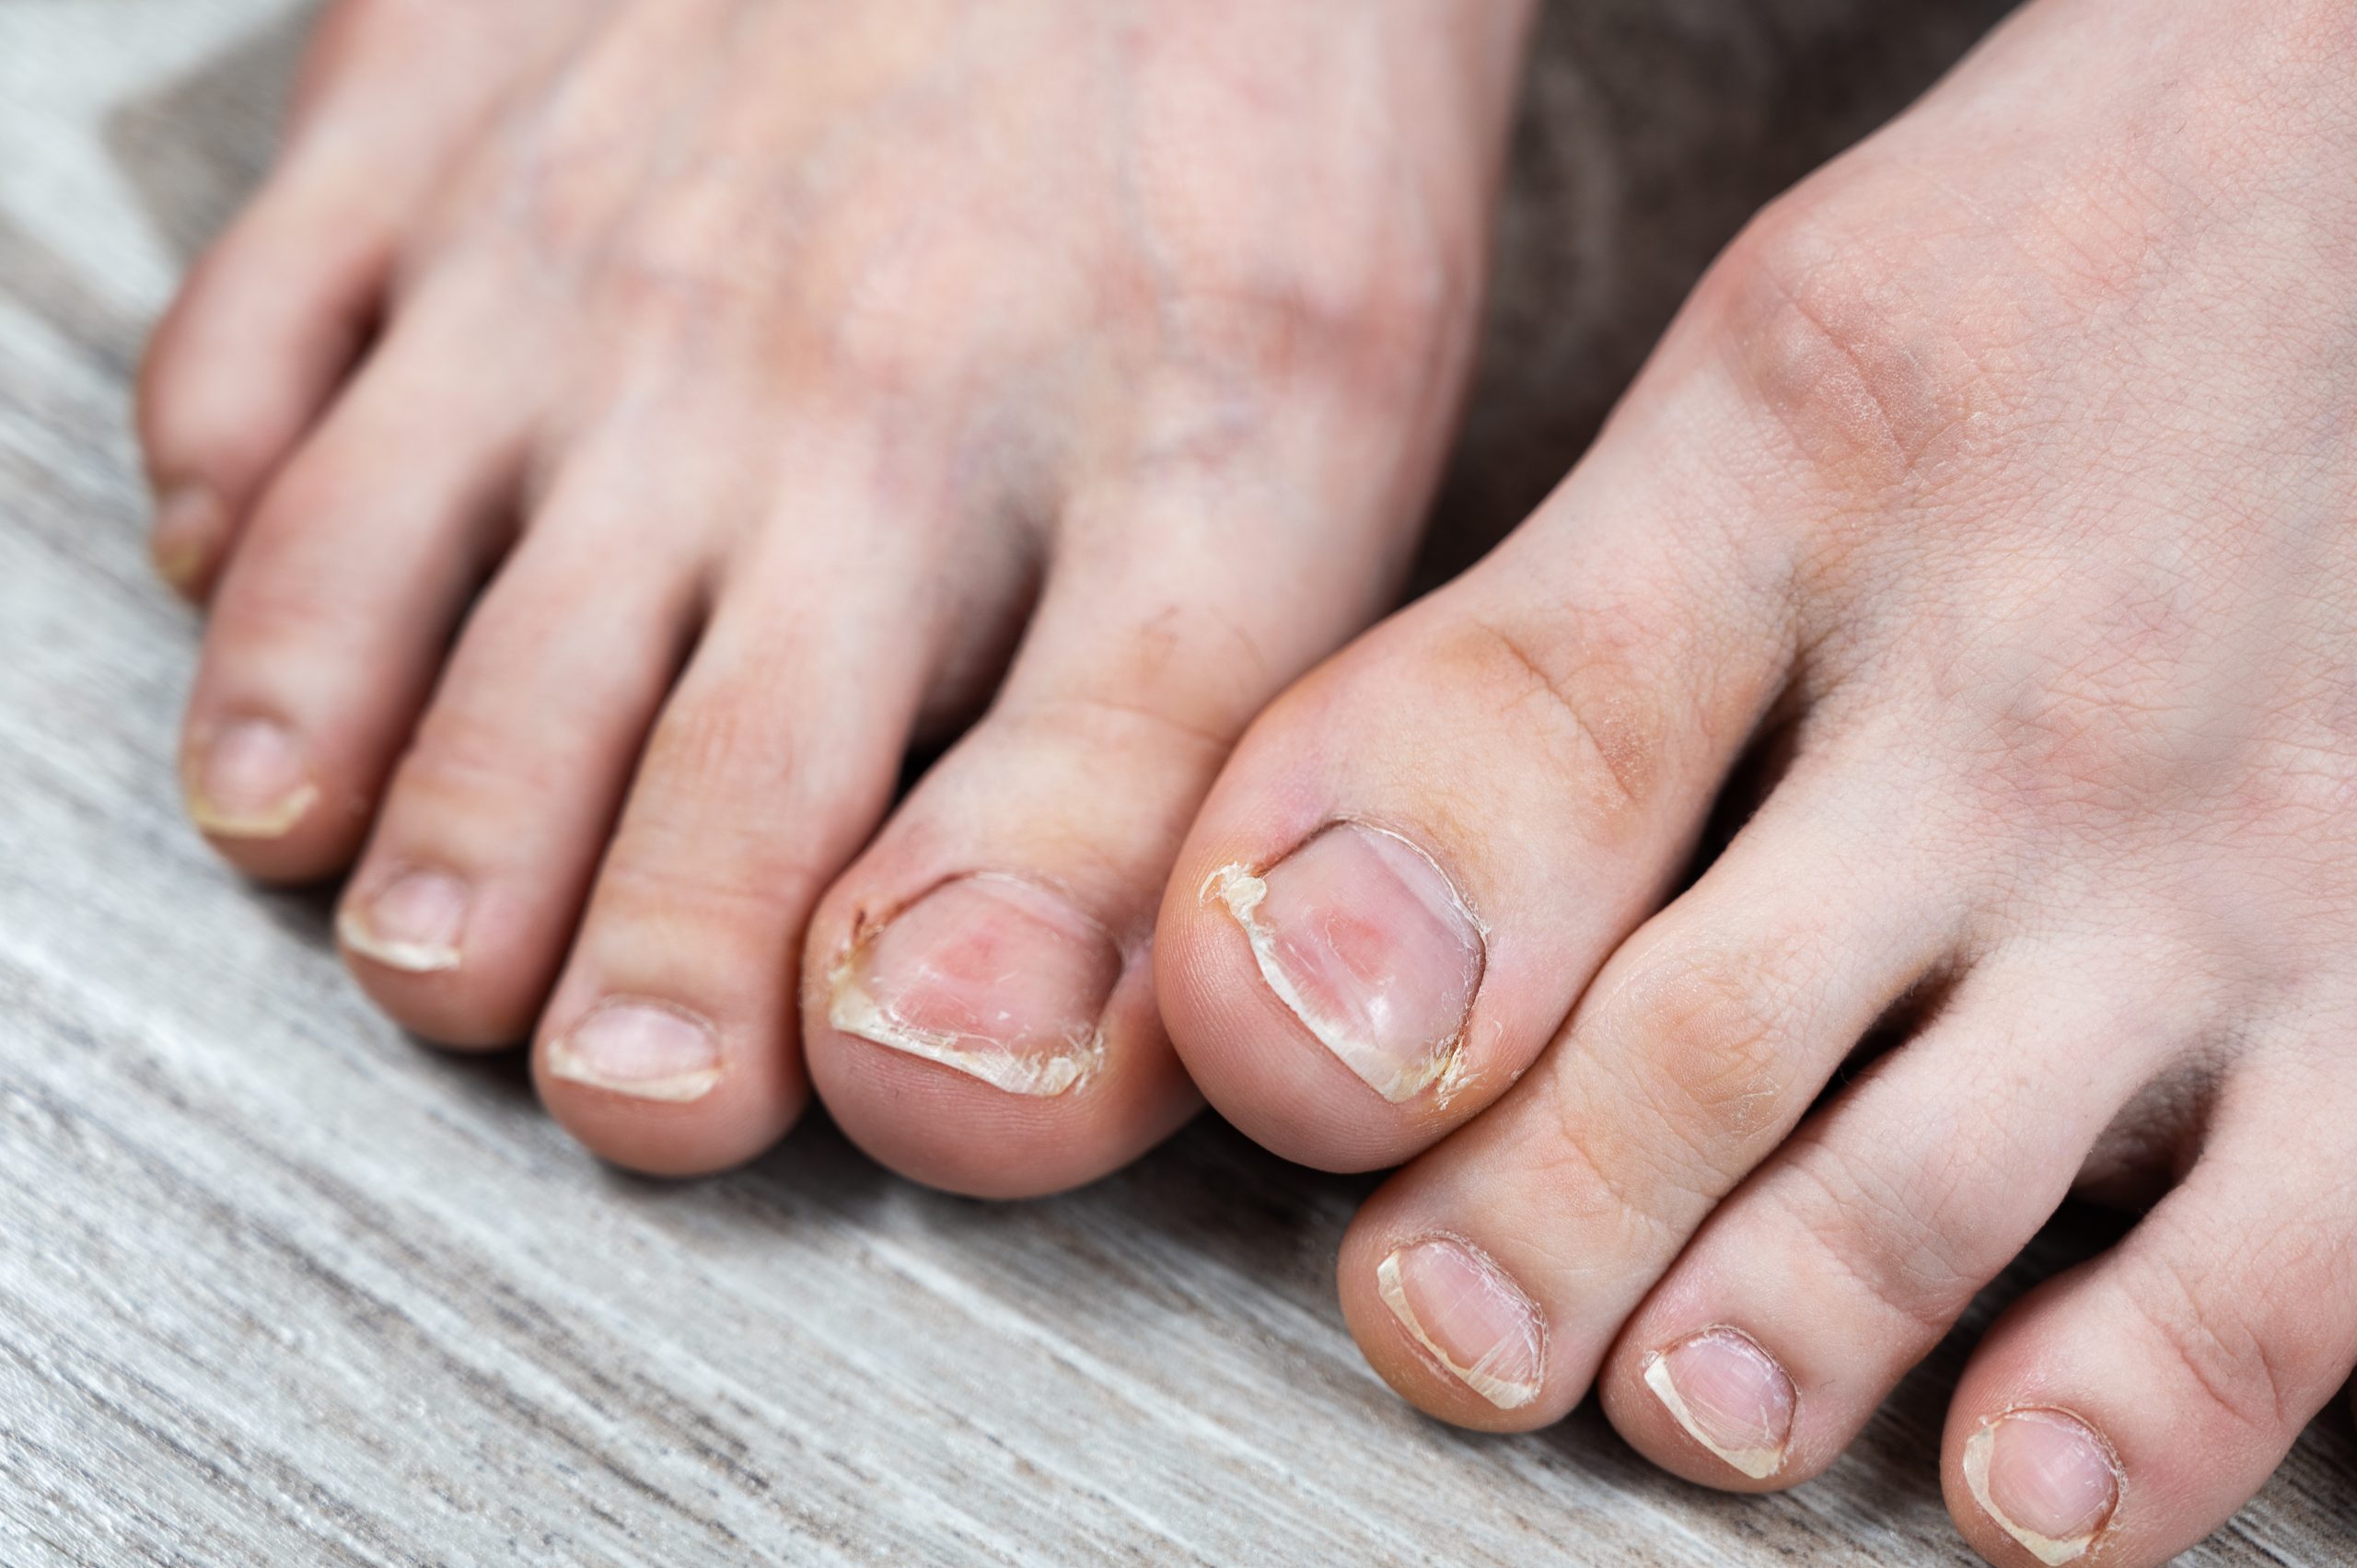 How to prevent and treat ingrown toenails?